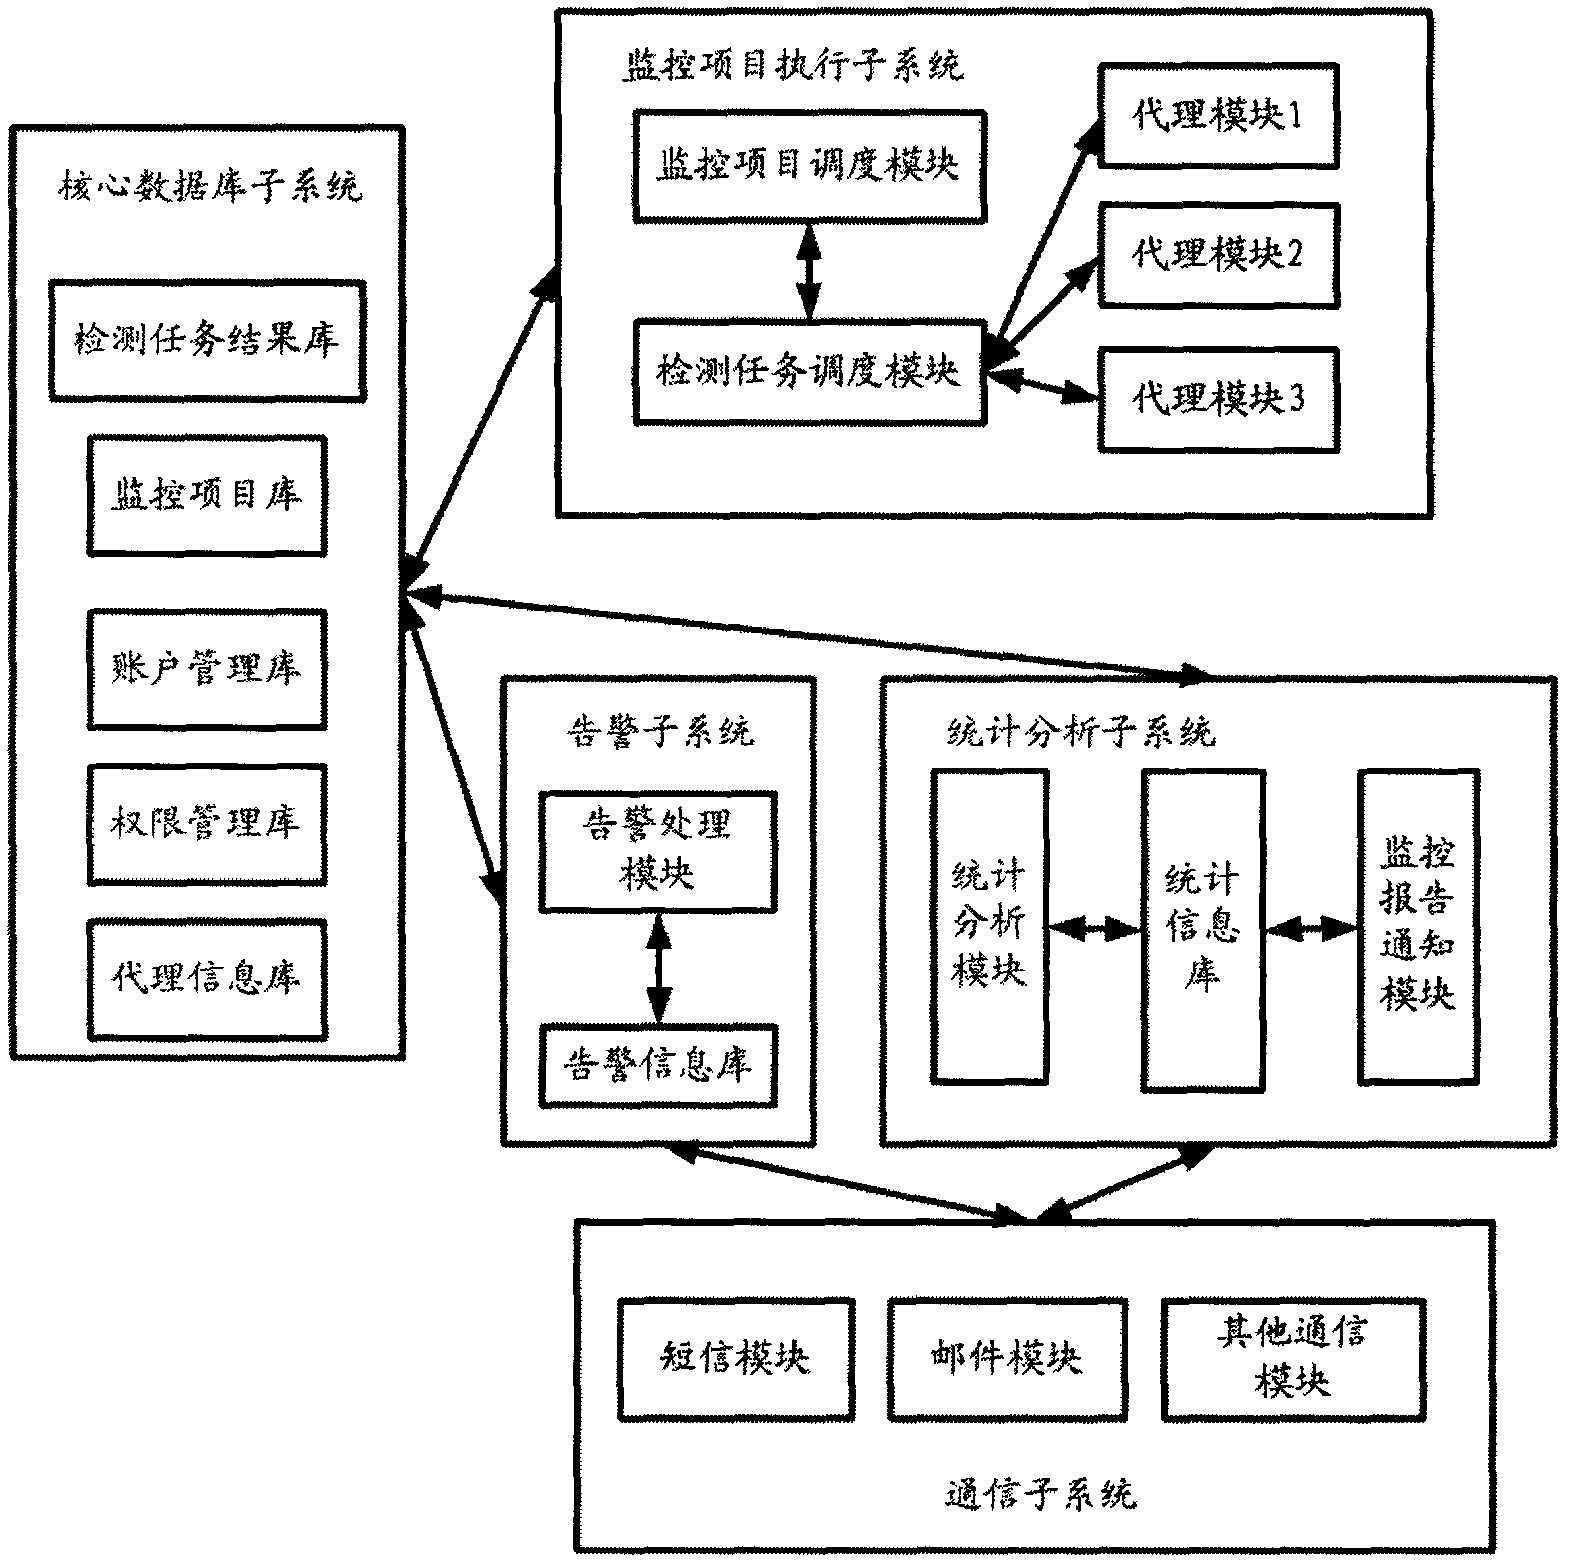 Monitoring system and method for detecting availability of web server